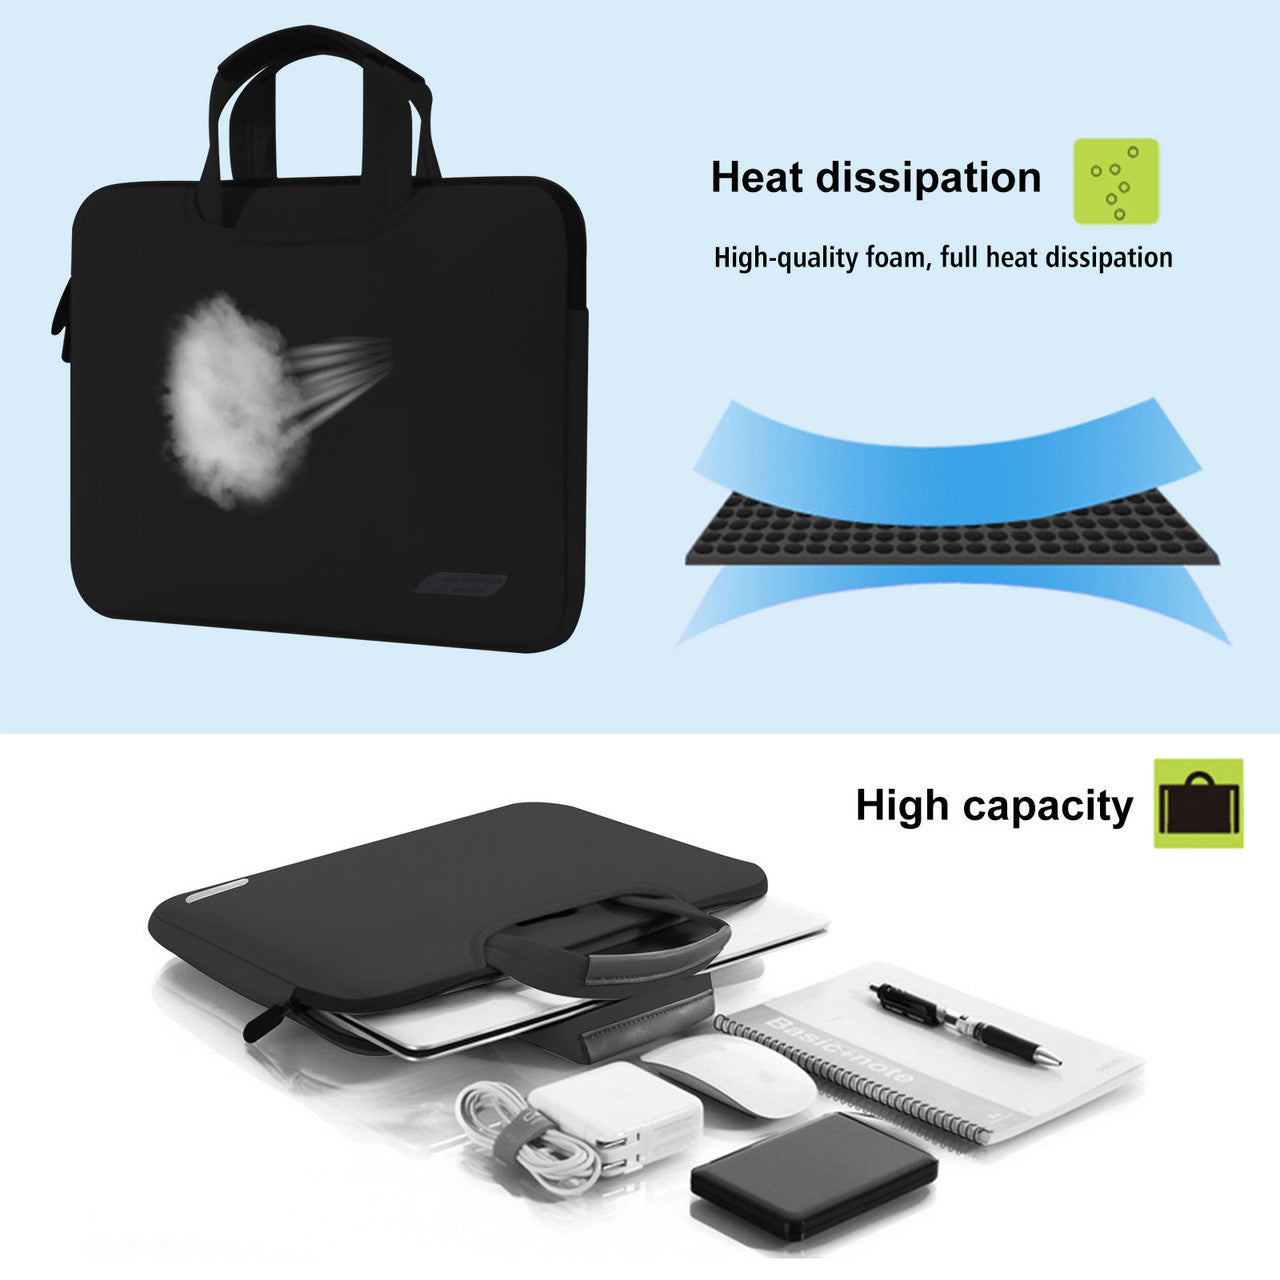 Laptop Sleeve Case 360° Protective Computer Bag Fits for 14 Inch laptops and Macs- Water Repellent